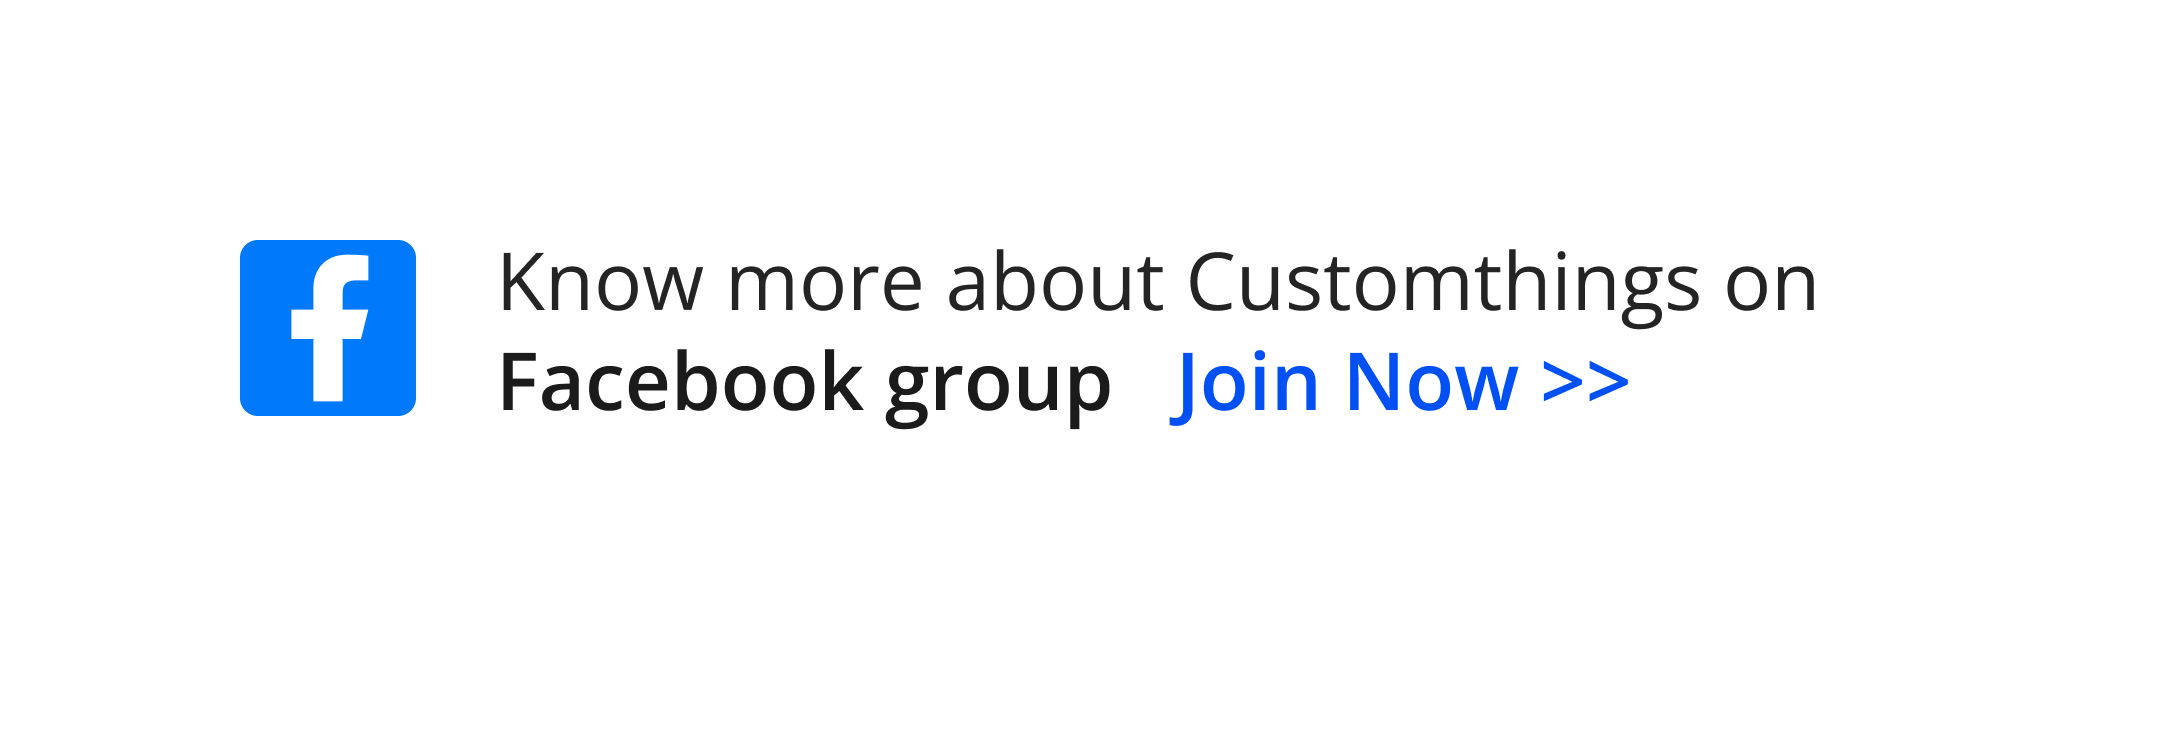 Know more about Customthings on Facebook group